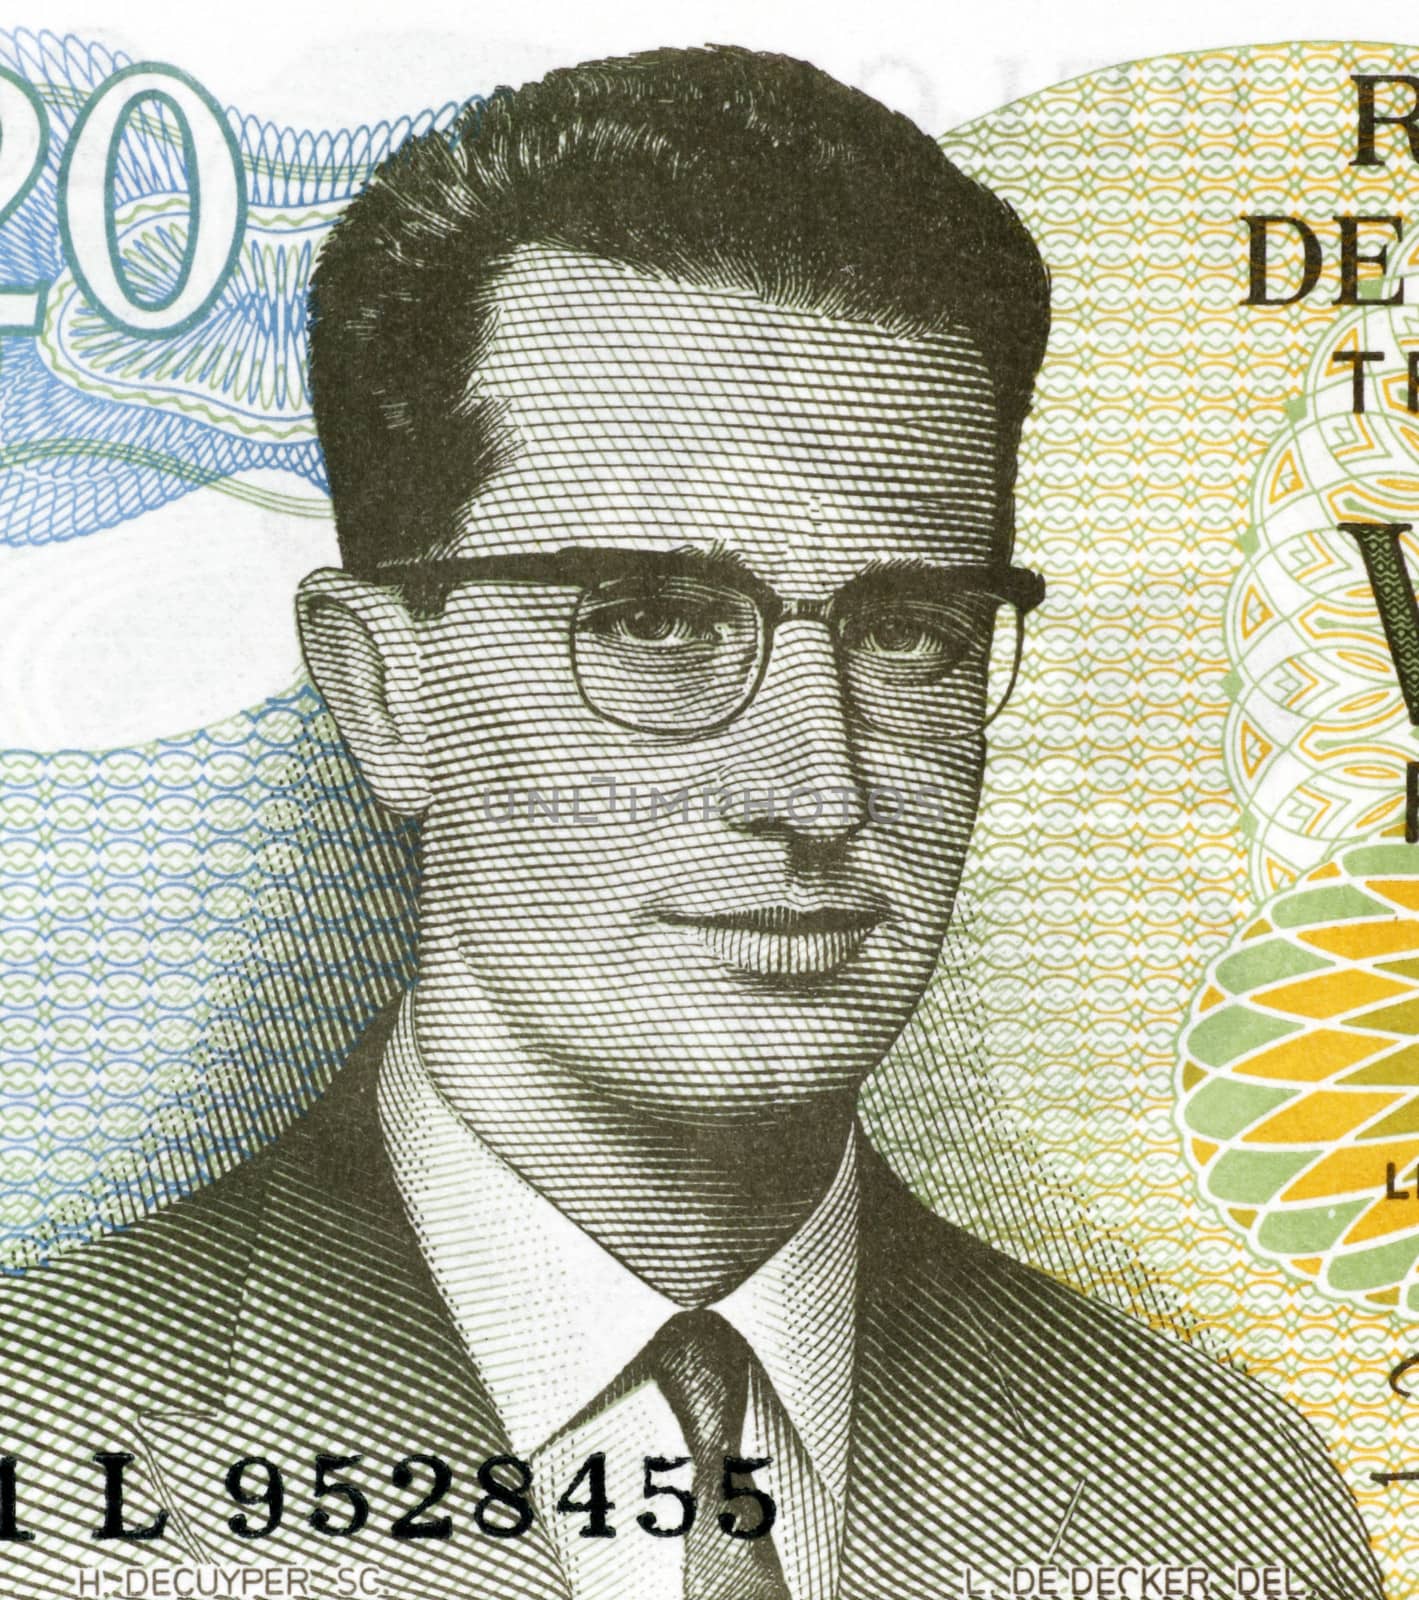 Baudouin of Belgium (1930-1993) on 20 Francs 1964 Banknote from Belgium. King of the Belgians during 1951-1993.